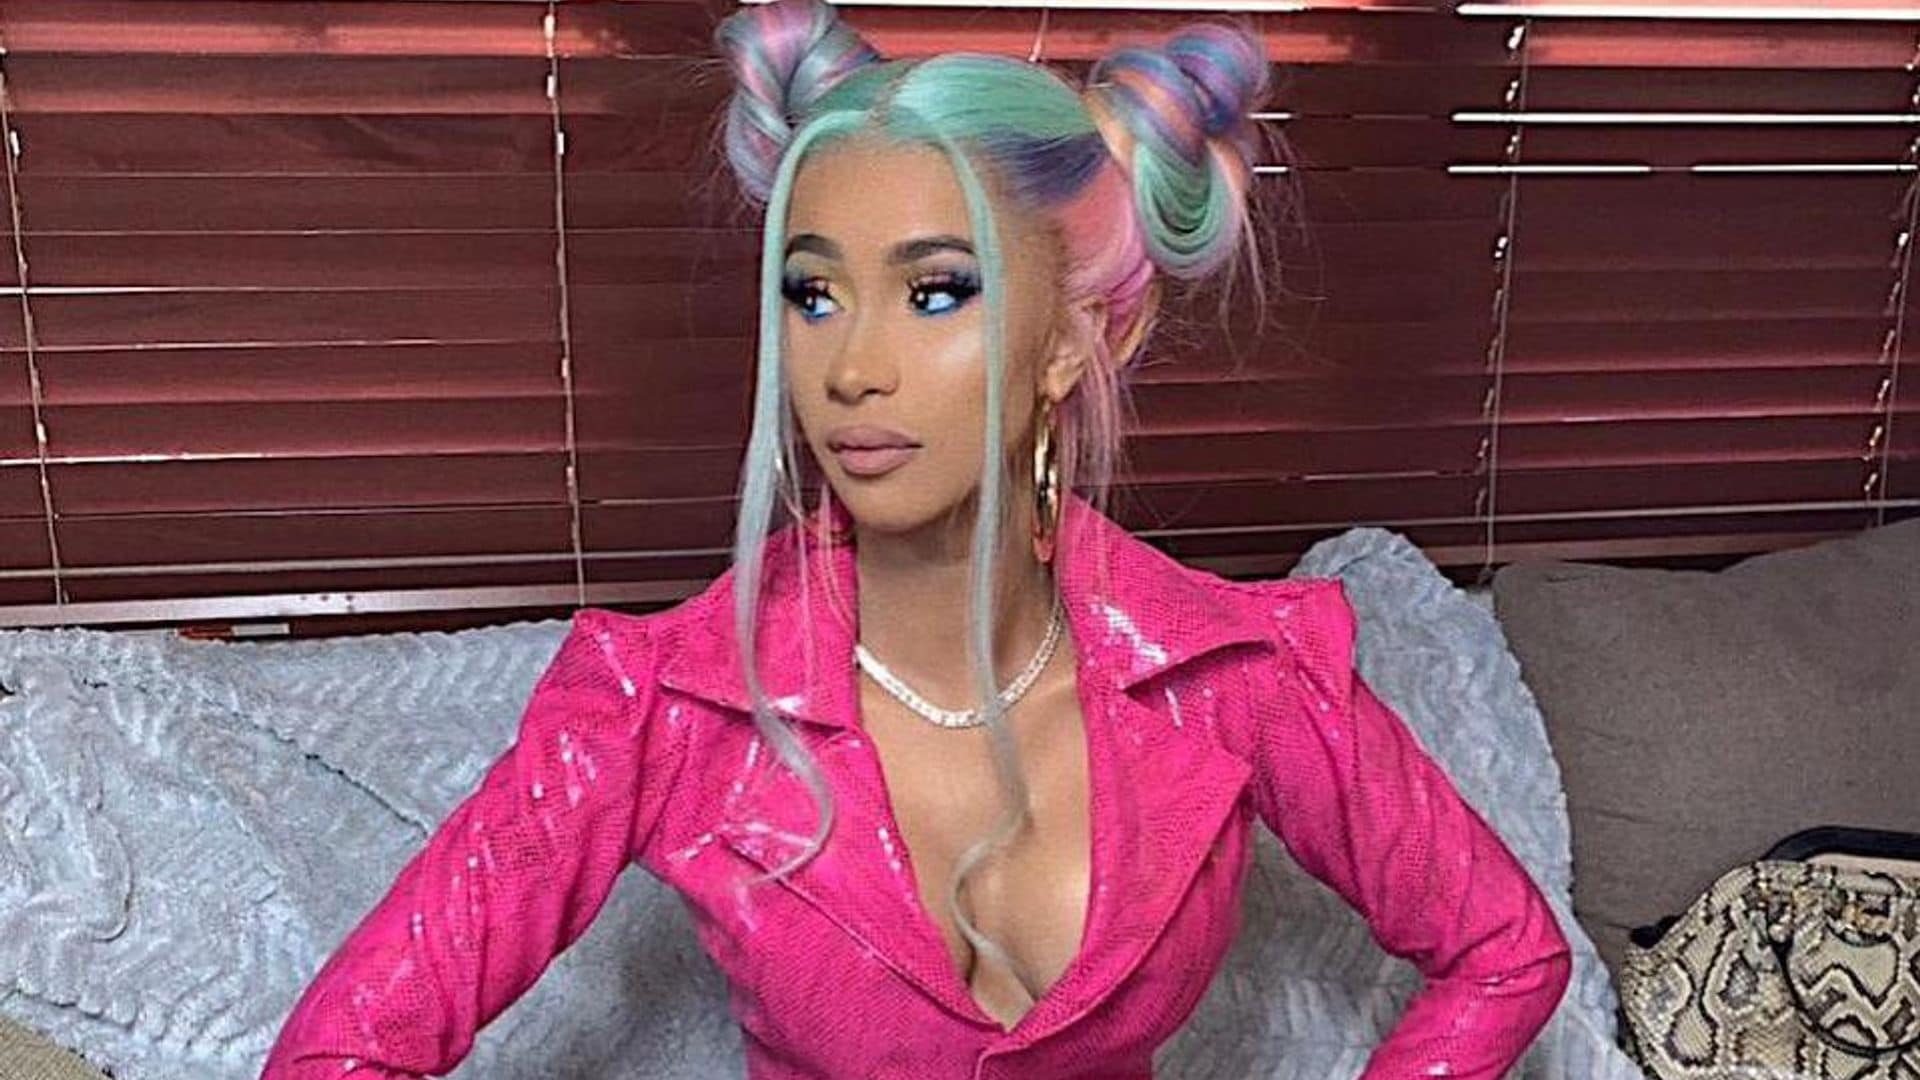 Cardi B wears no makeup and shows off her natural hair – check out her look